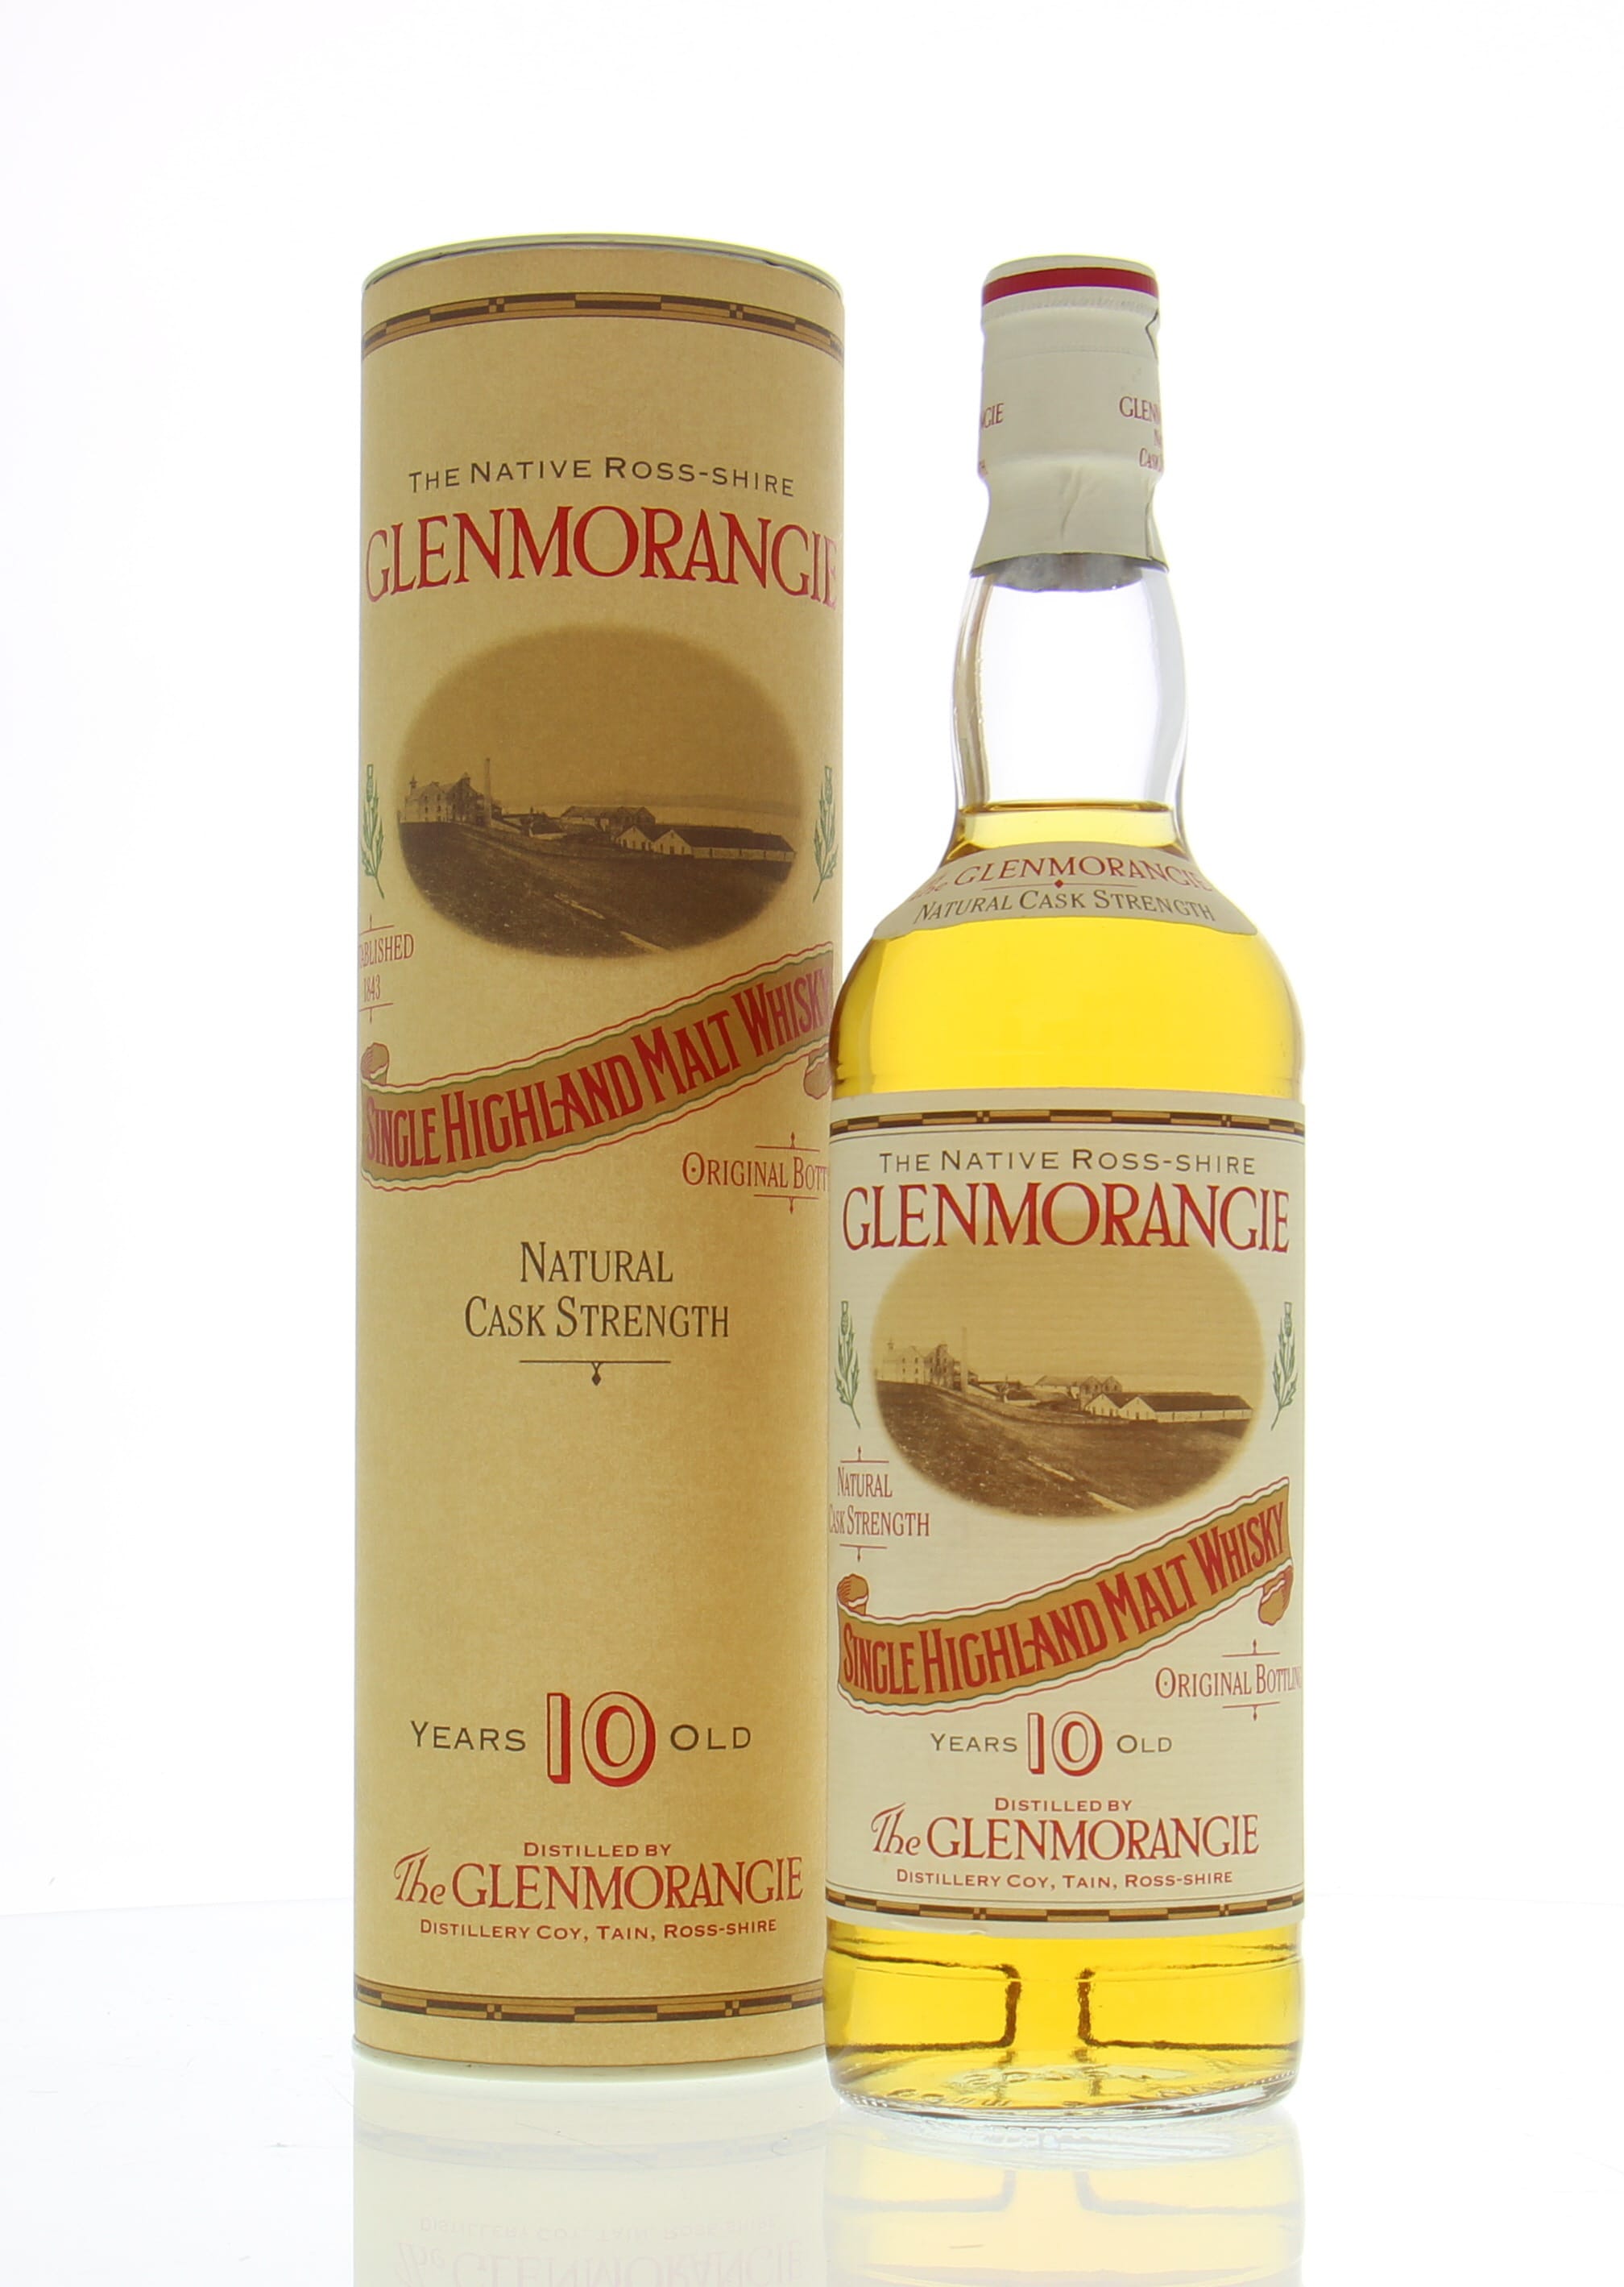 Glenmorangie - 10 Years Old The Native Ross-Shire Cask:5341 58.8% 1982 In Original Container